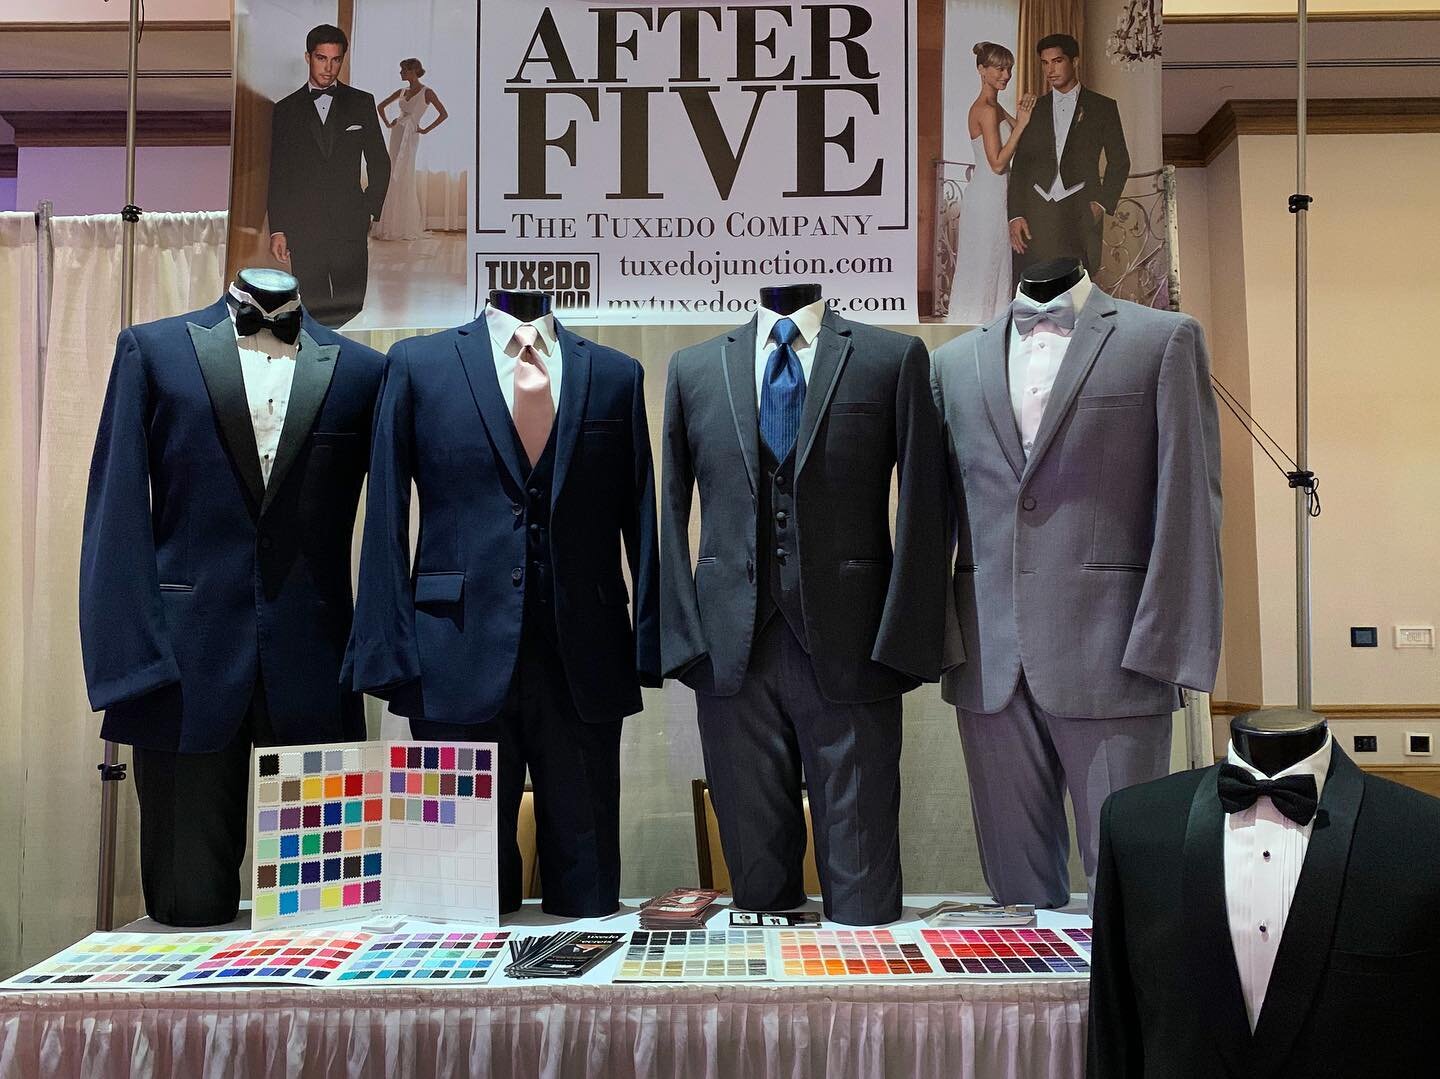 Come visit us at the 1st Bridal Show of the year! Doors open at 1pm. Enjoy music, food, door prizes, and much more!! #batonrougebridalshow #brbs #brbs2020 #afterfivetuxedo